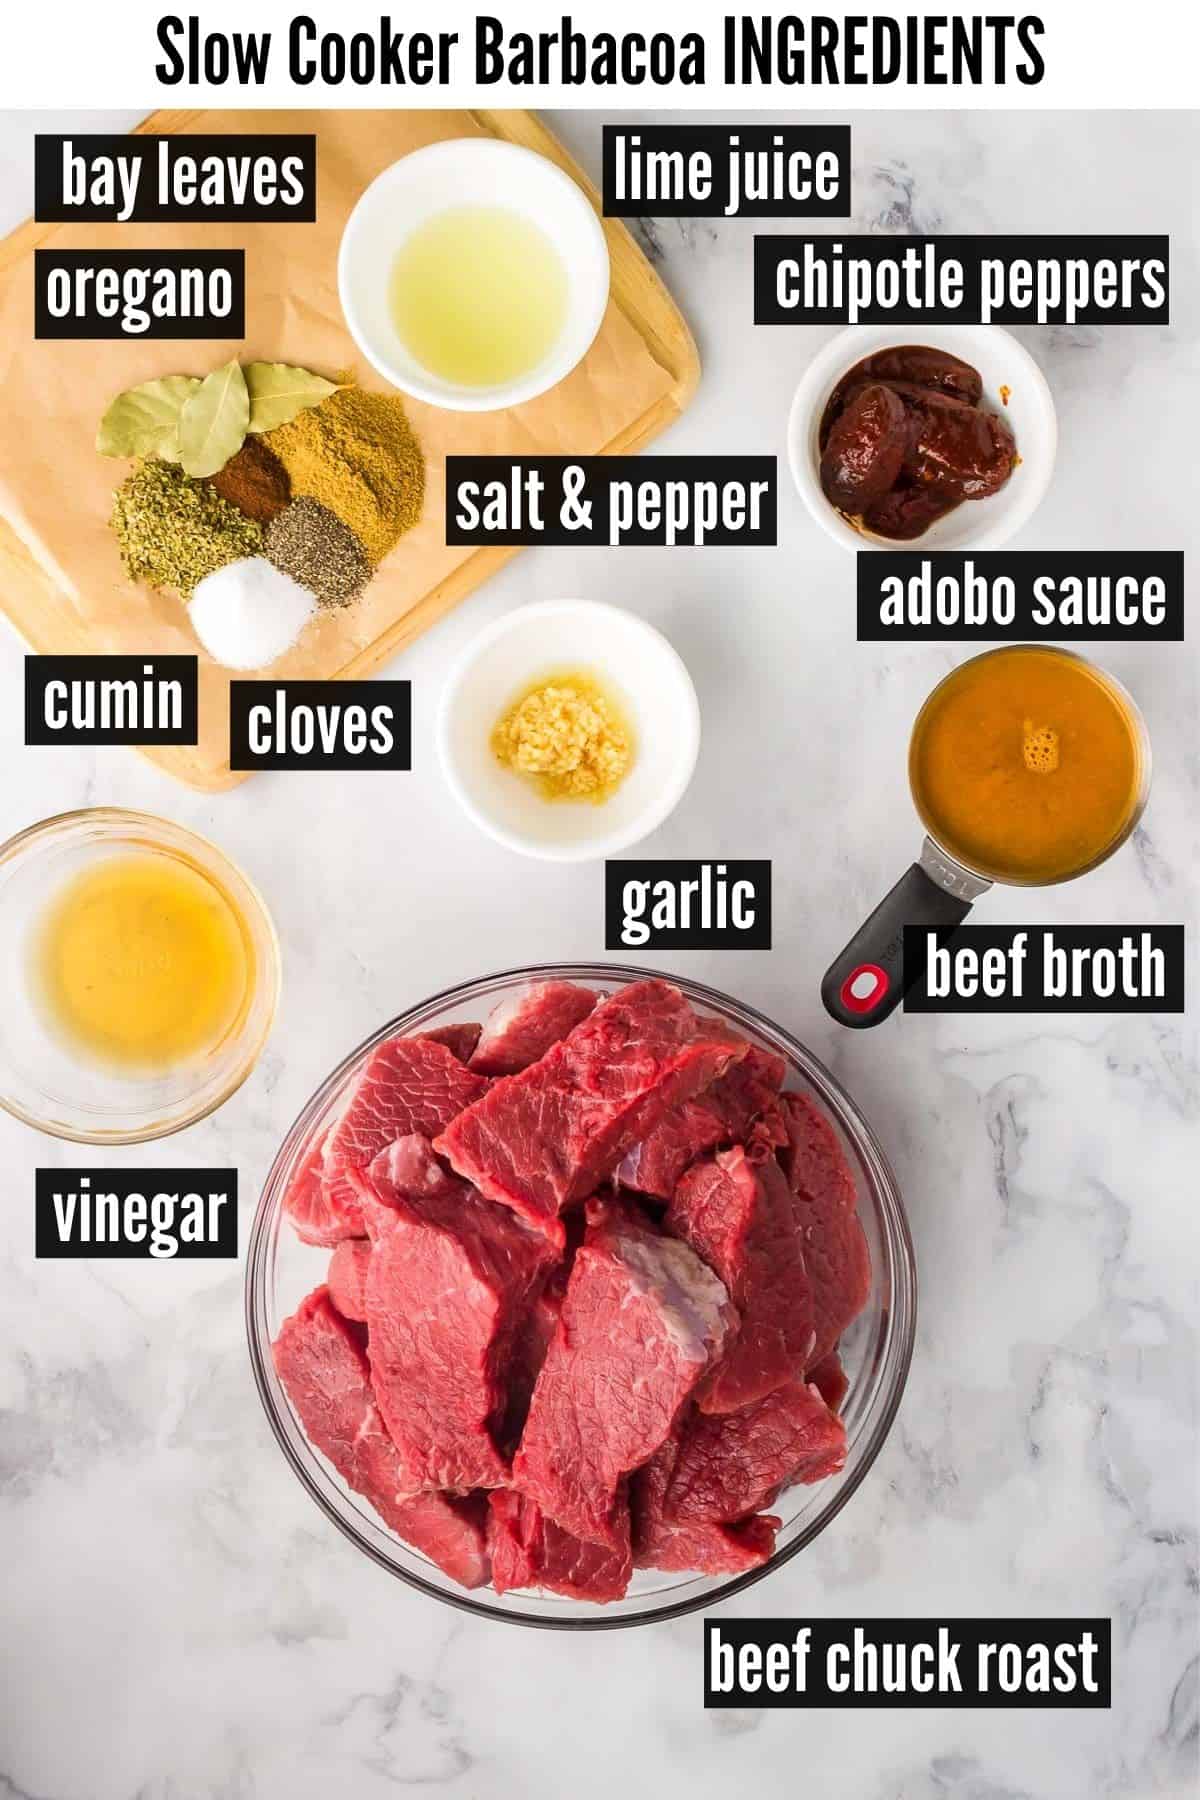 slow cooker barbacoa labelled ingredients